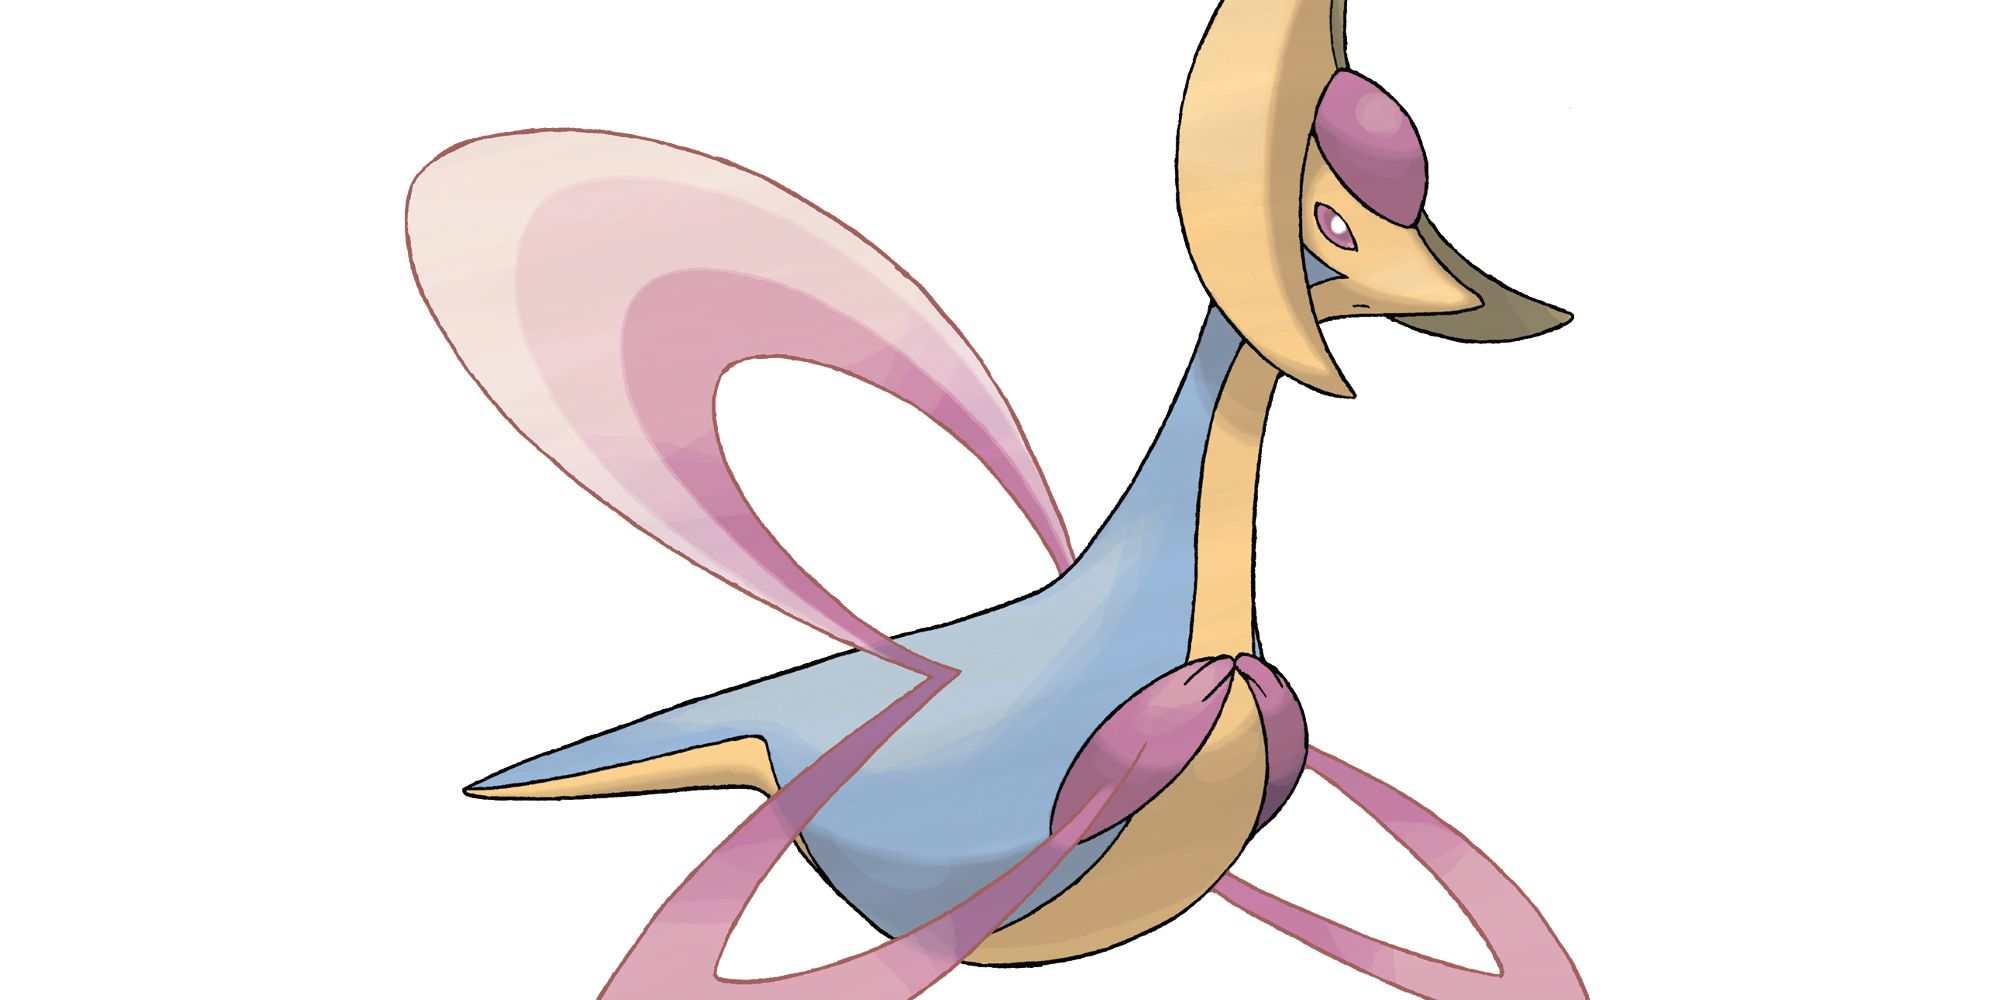 Cresselia against a white background